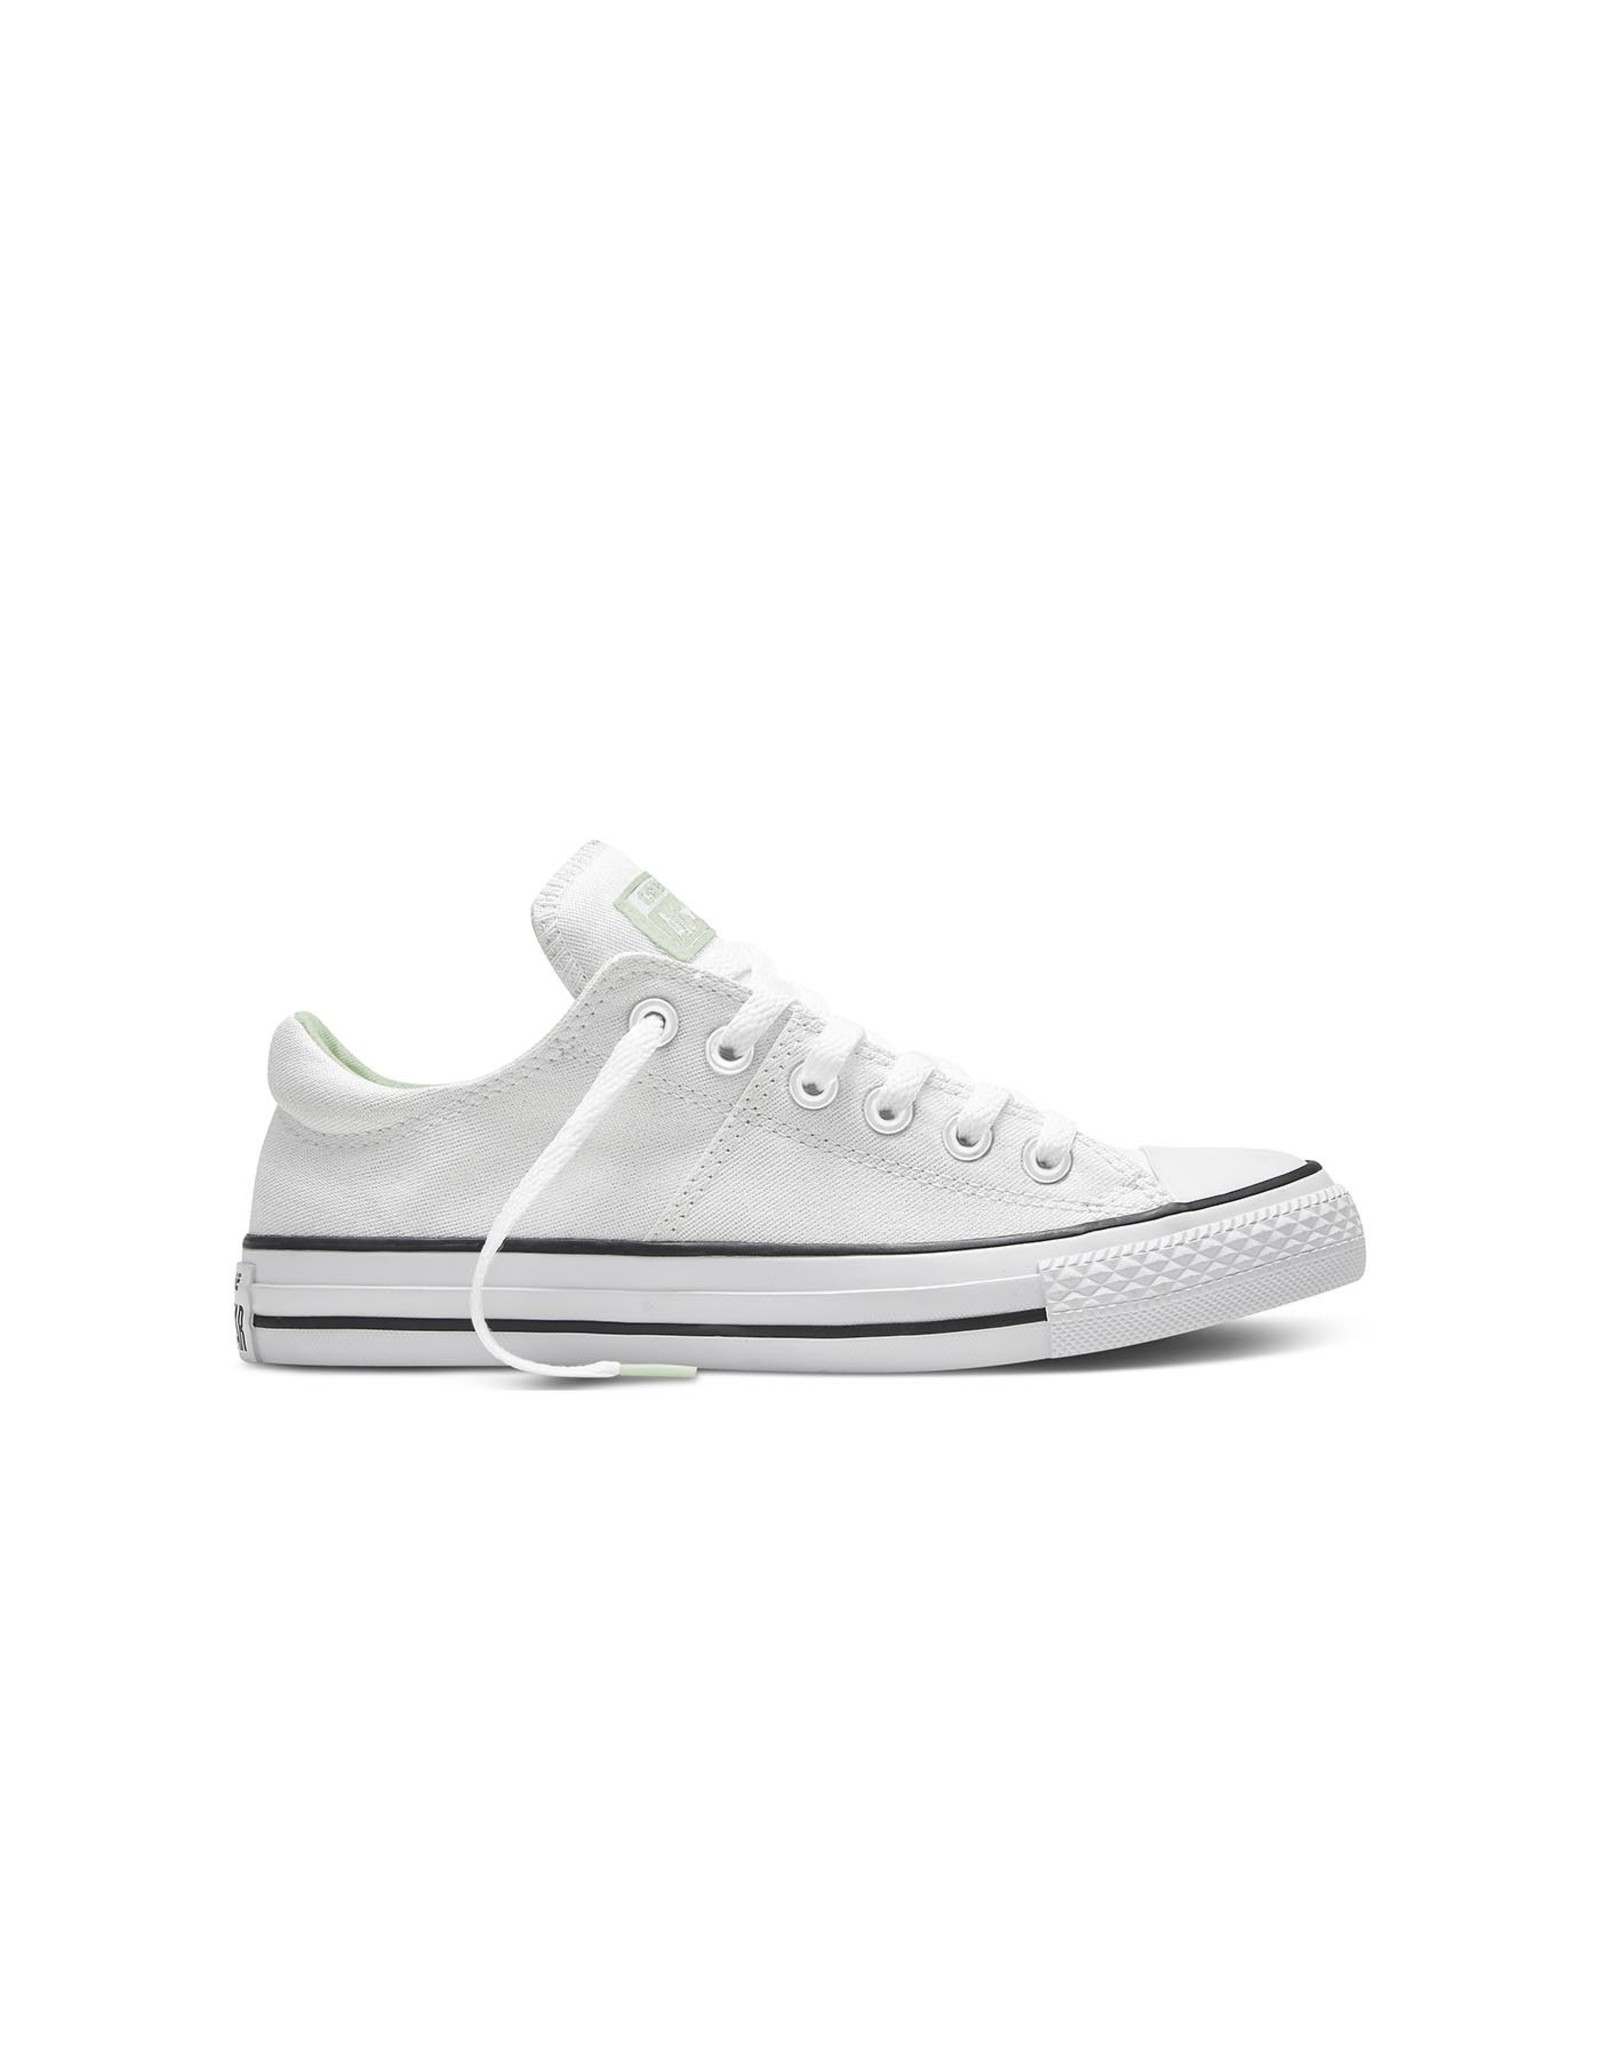 converse all star madison white